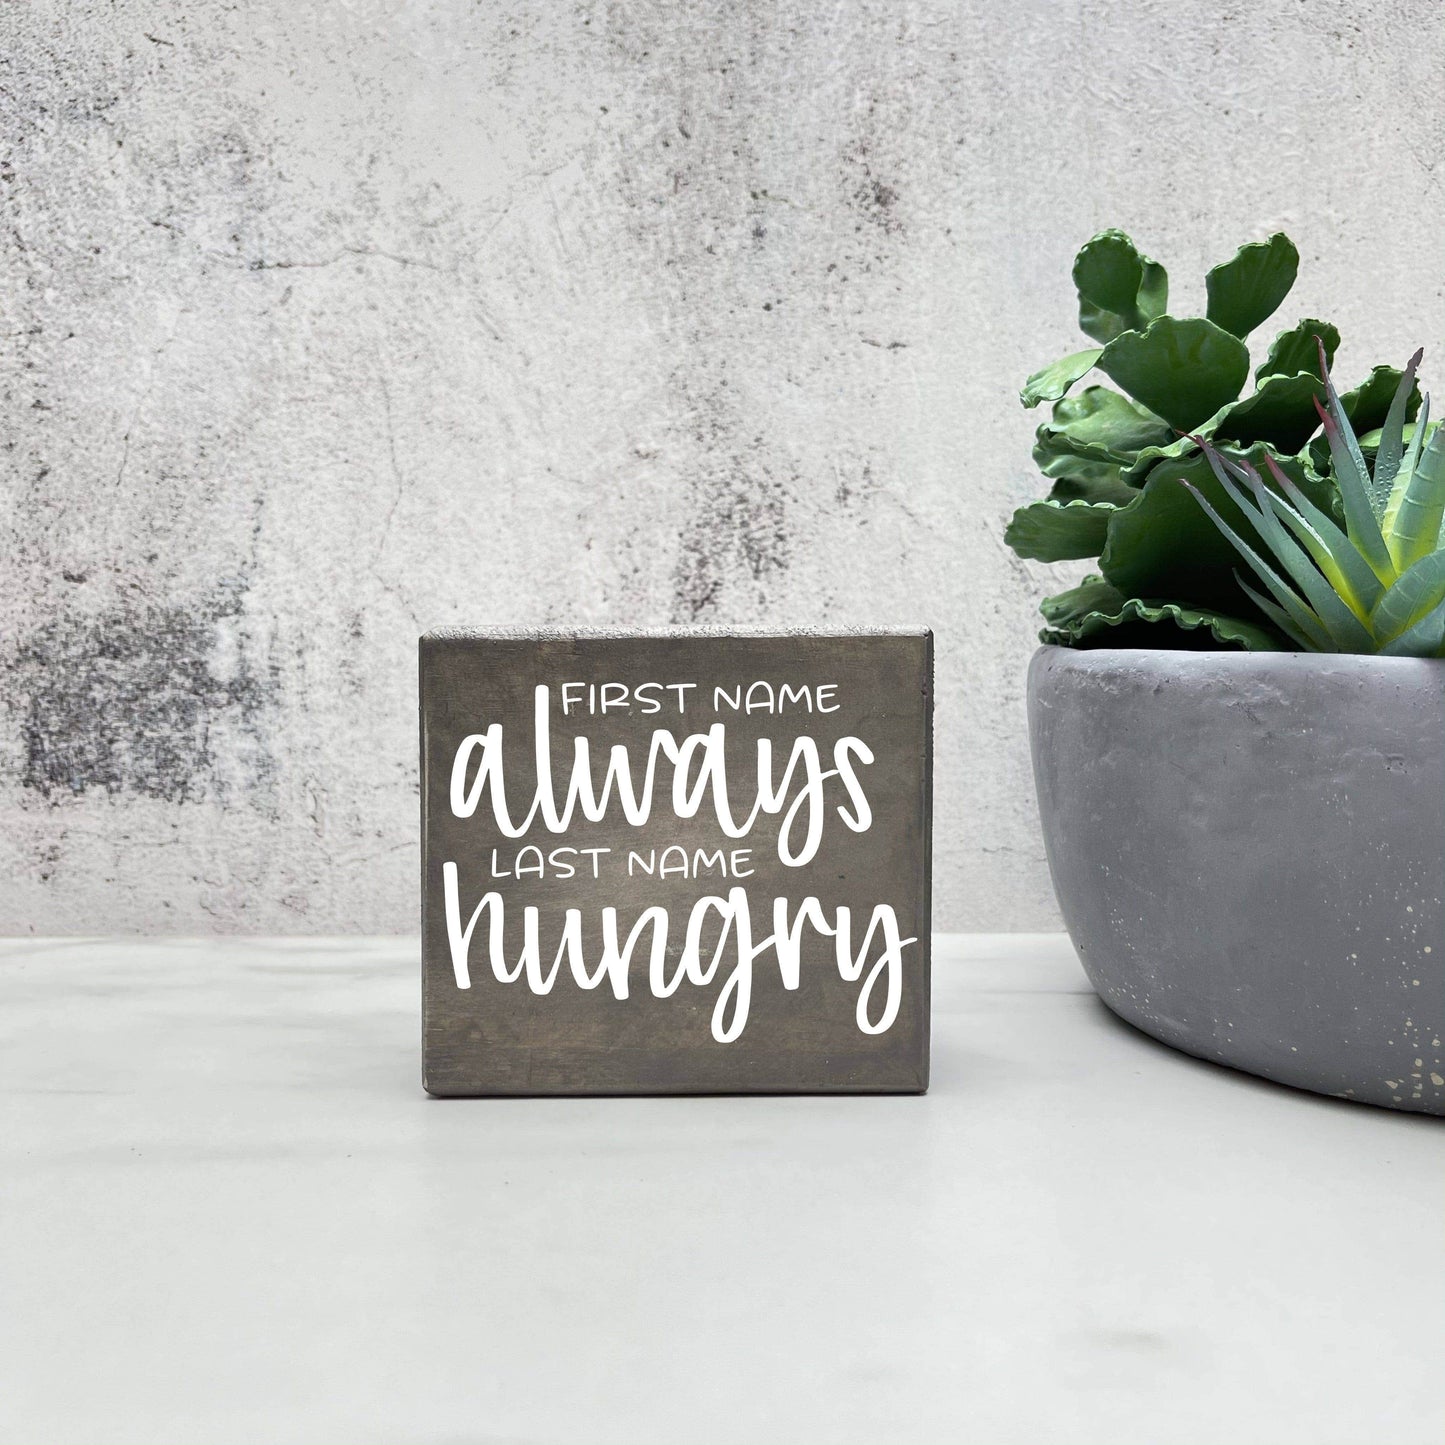 First name Always, Last name Hungry, kitchen wood sign, kitchen decor, home decor